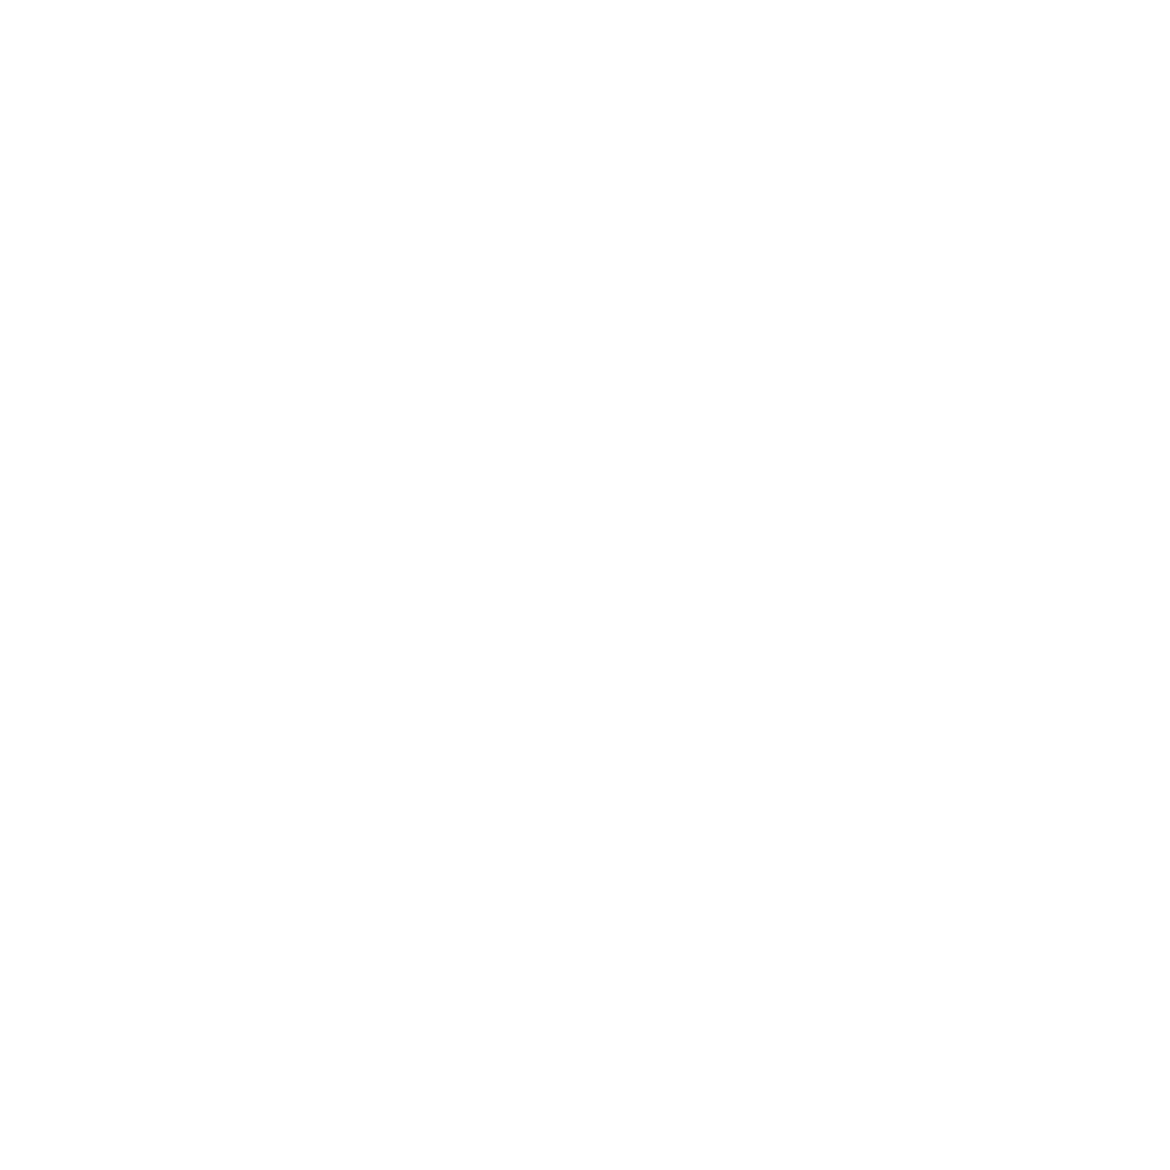 An illustrated person with short hair, wearing glasses, holding a cup of coffee, representing one of our experts.